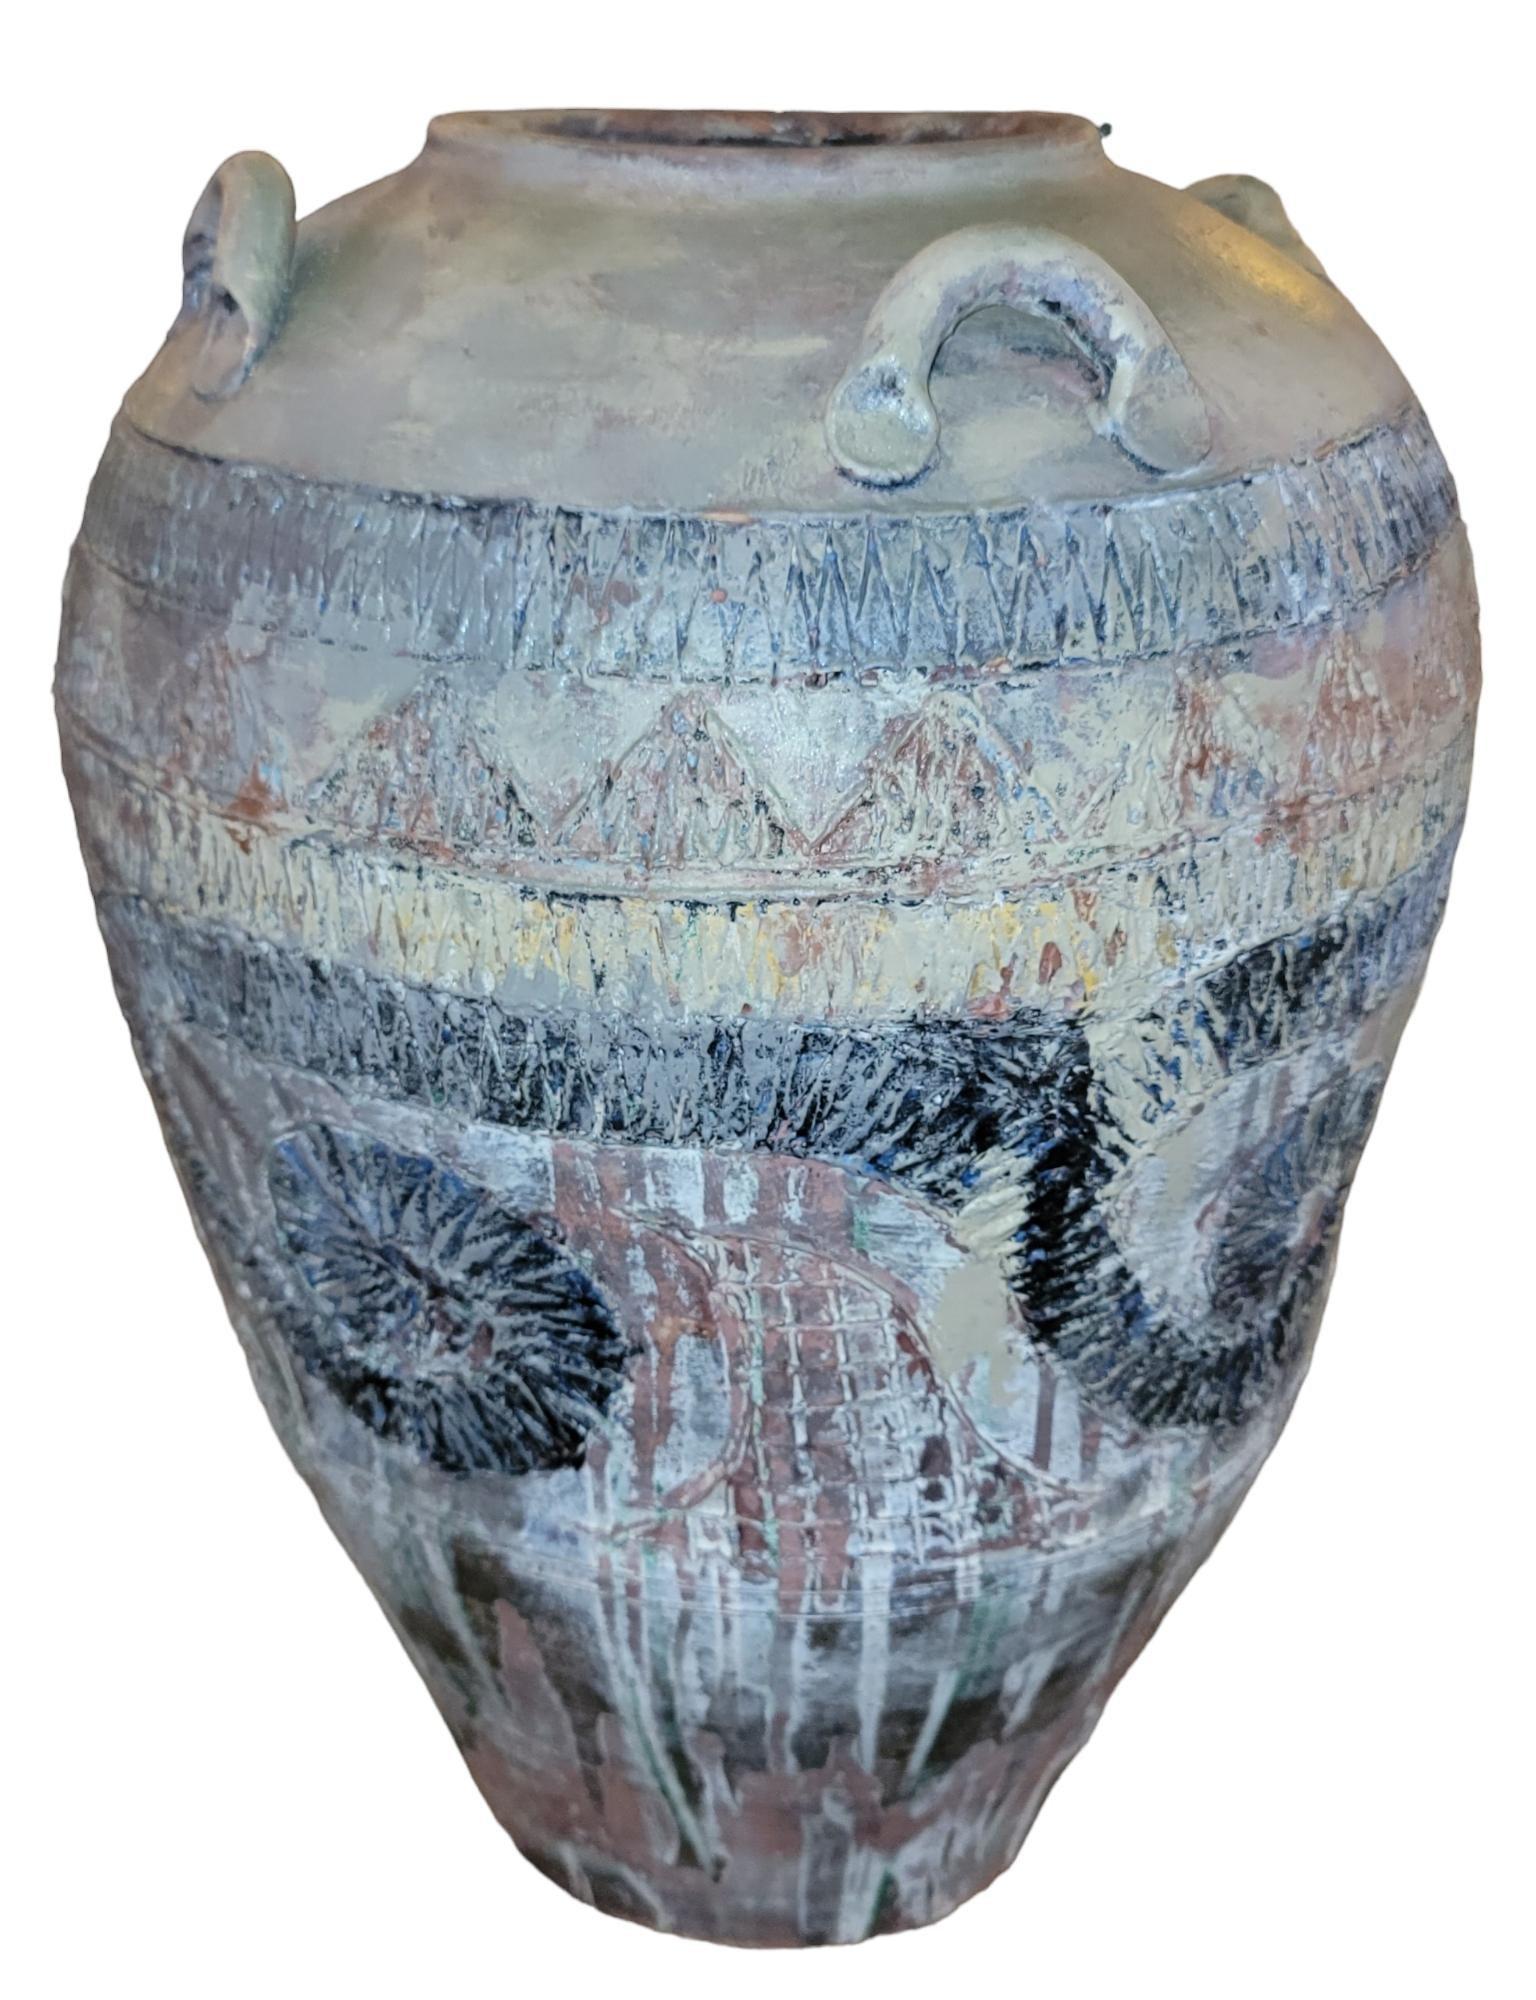 Wonderful Large hand made textured vase with wonderful earth tone colors. Four handles for visuals. Has a vibrant southwestern feel. Great patina in great condition